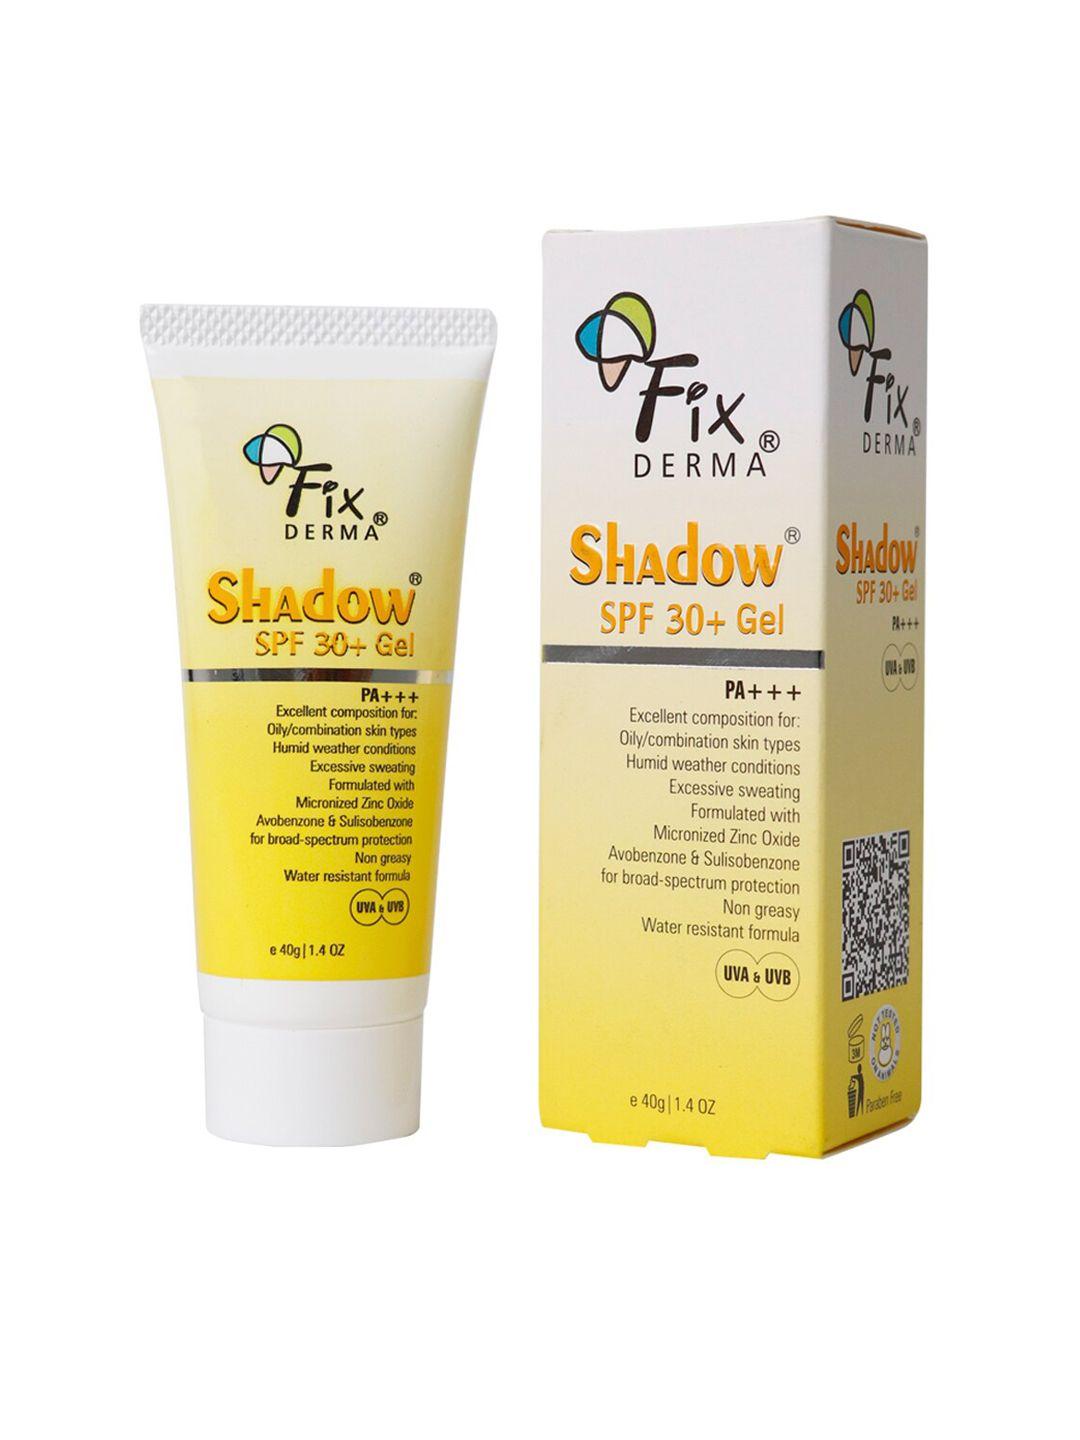 fixderma shadow sunscreen spf 30+ gel for oily skin with pa+++ protection - 40 g